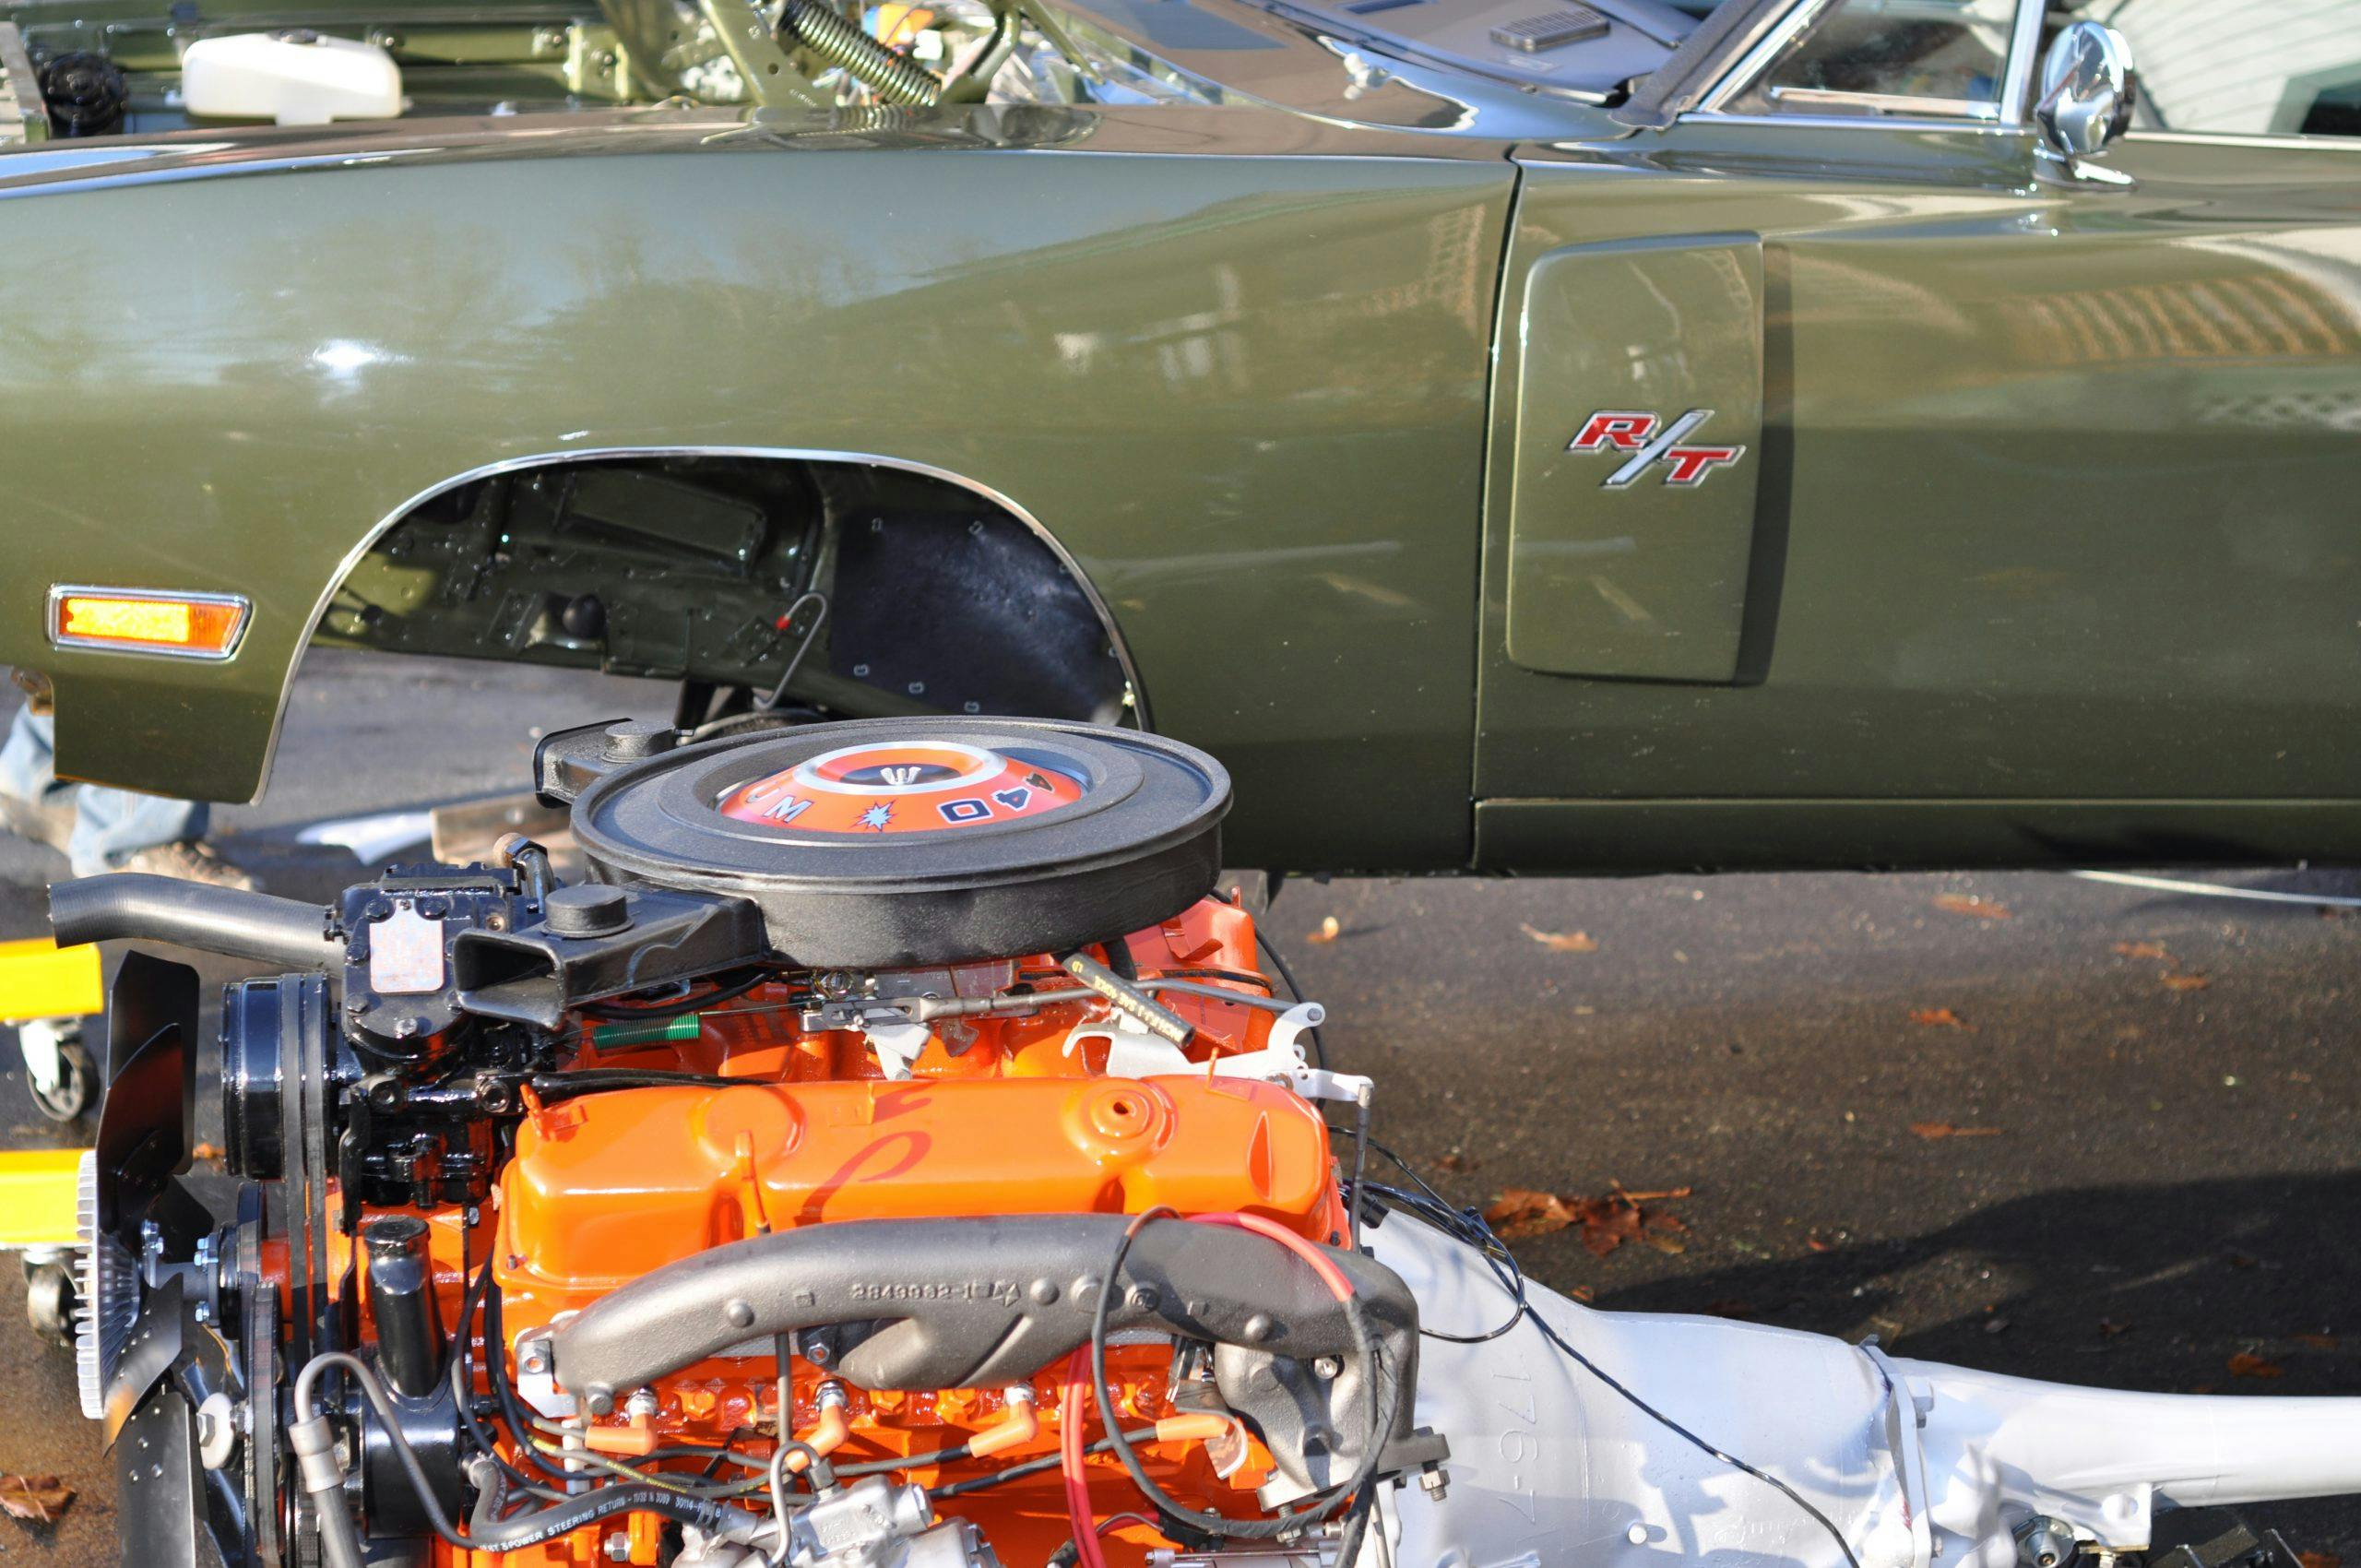 1970 Dodge Charger RT engine